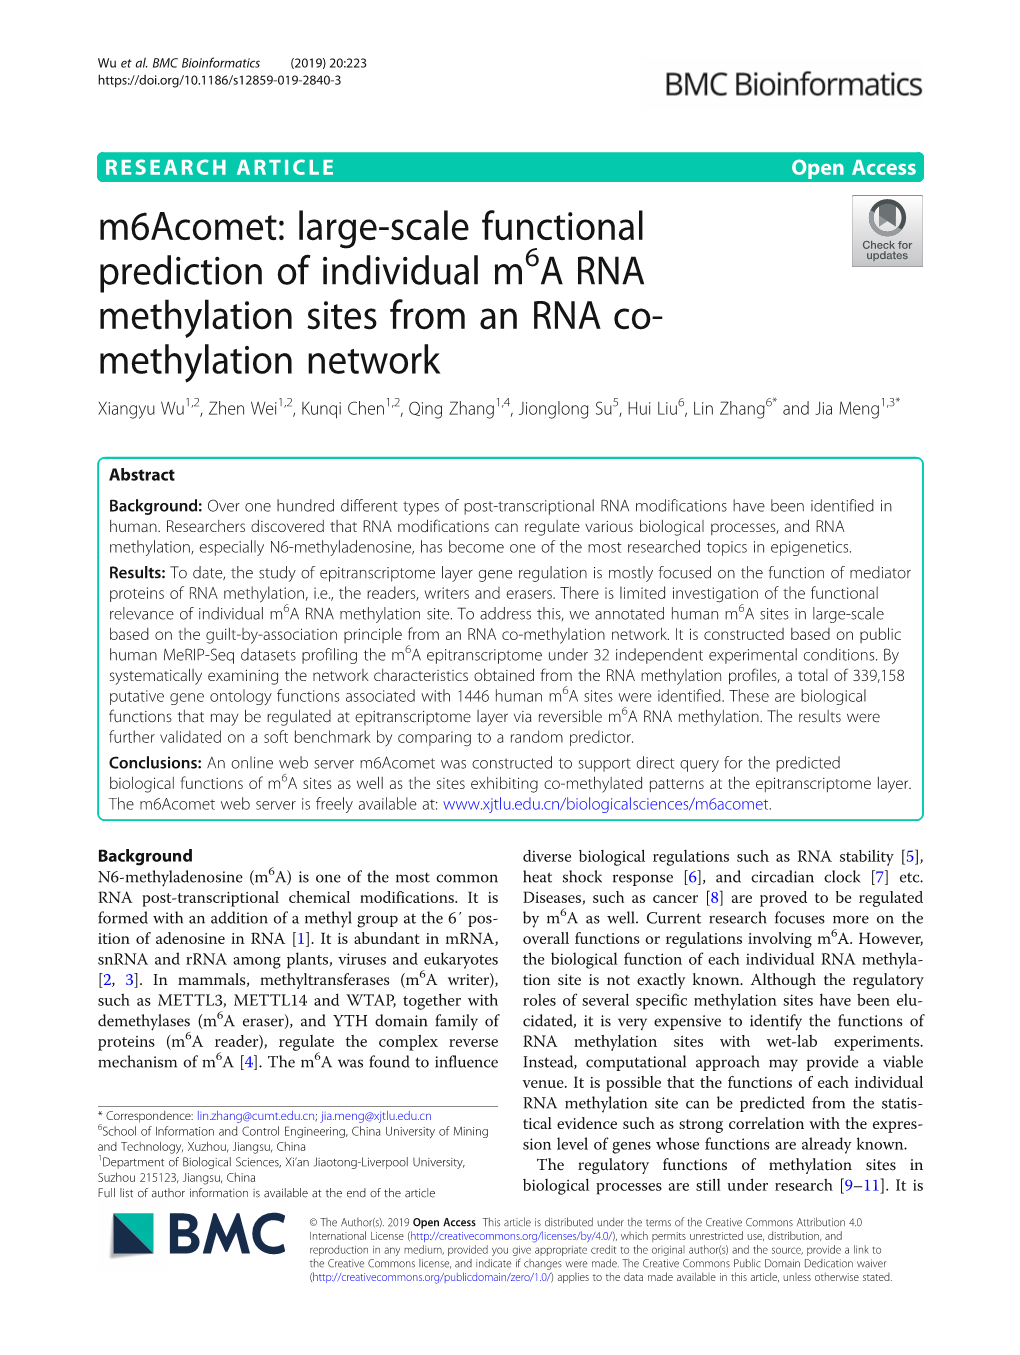 Large-Scale Functional Prediction of Individual M6a RNA Methylation Sites from an RNA Co-Methylation Network